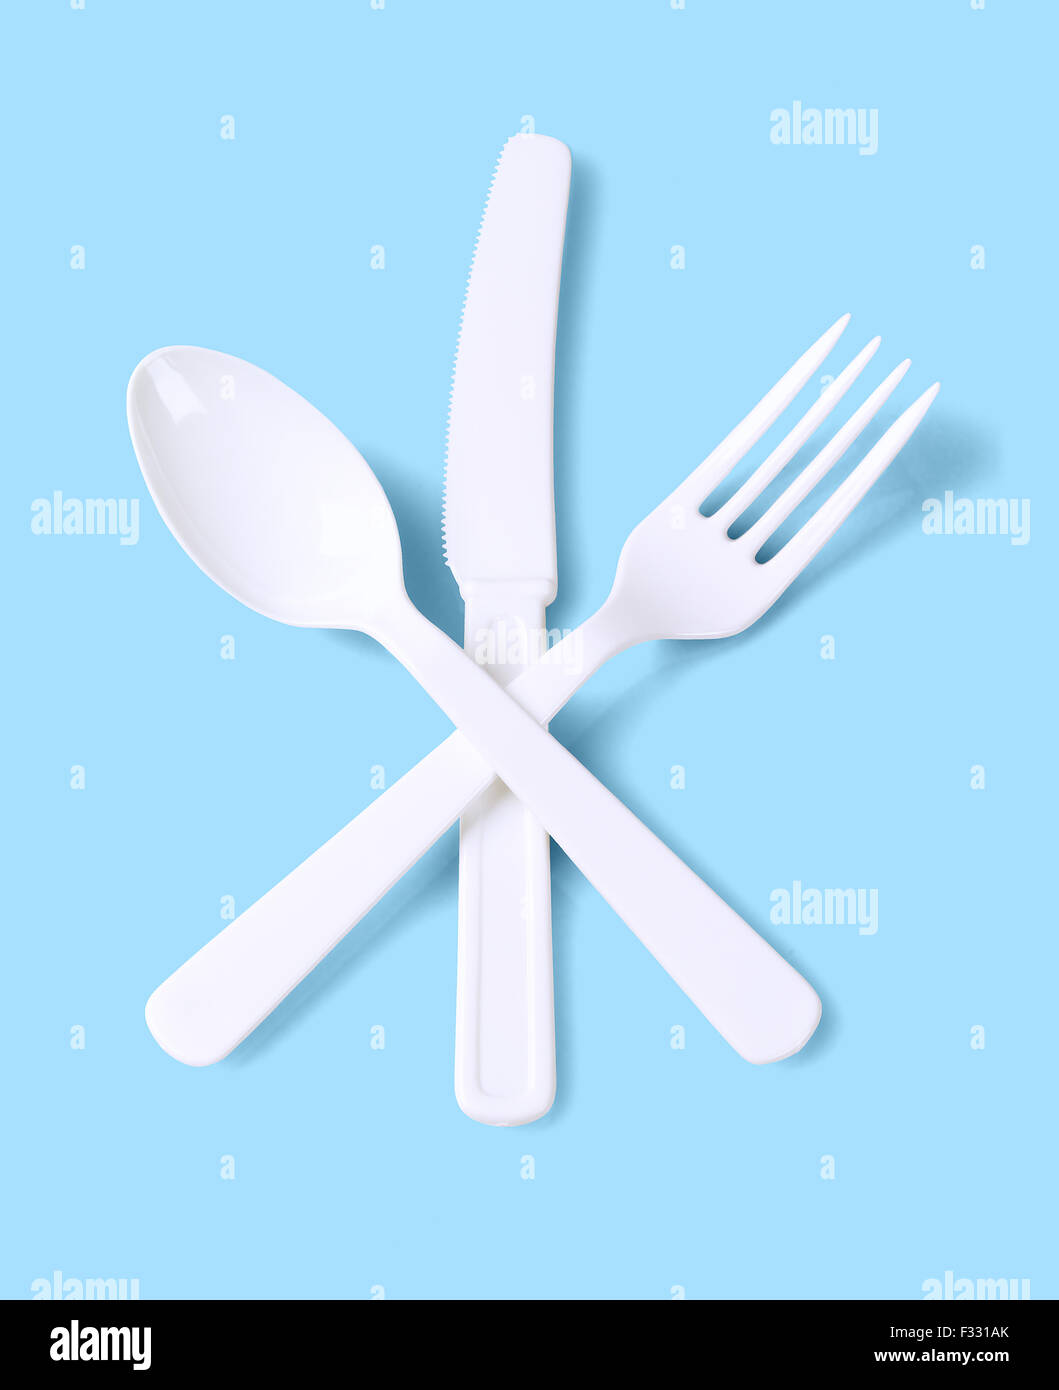 Plastic Fork Spoon and Knife on Blue Background Stock Photo